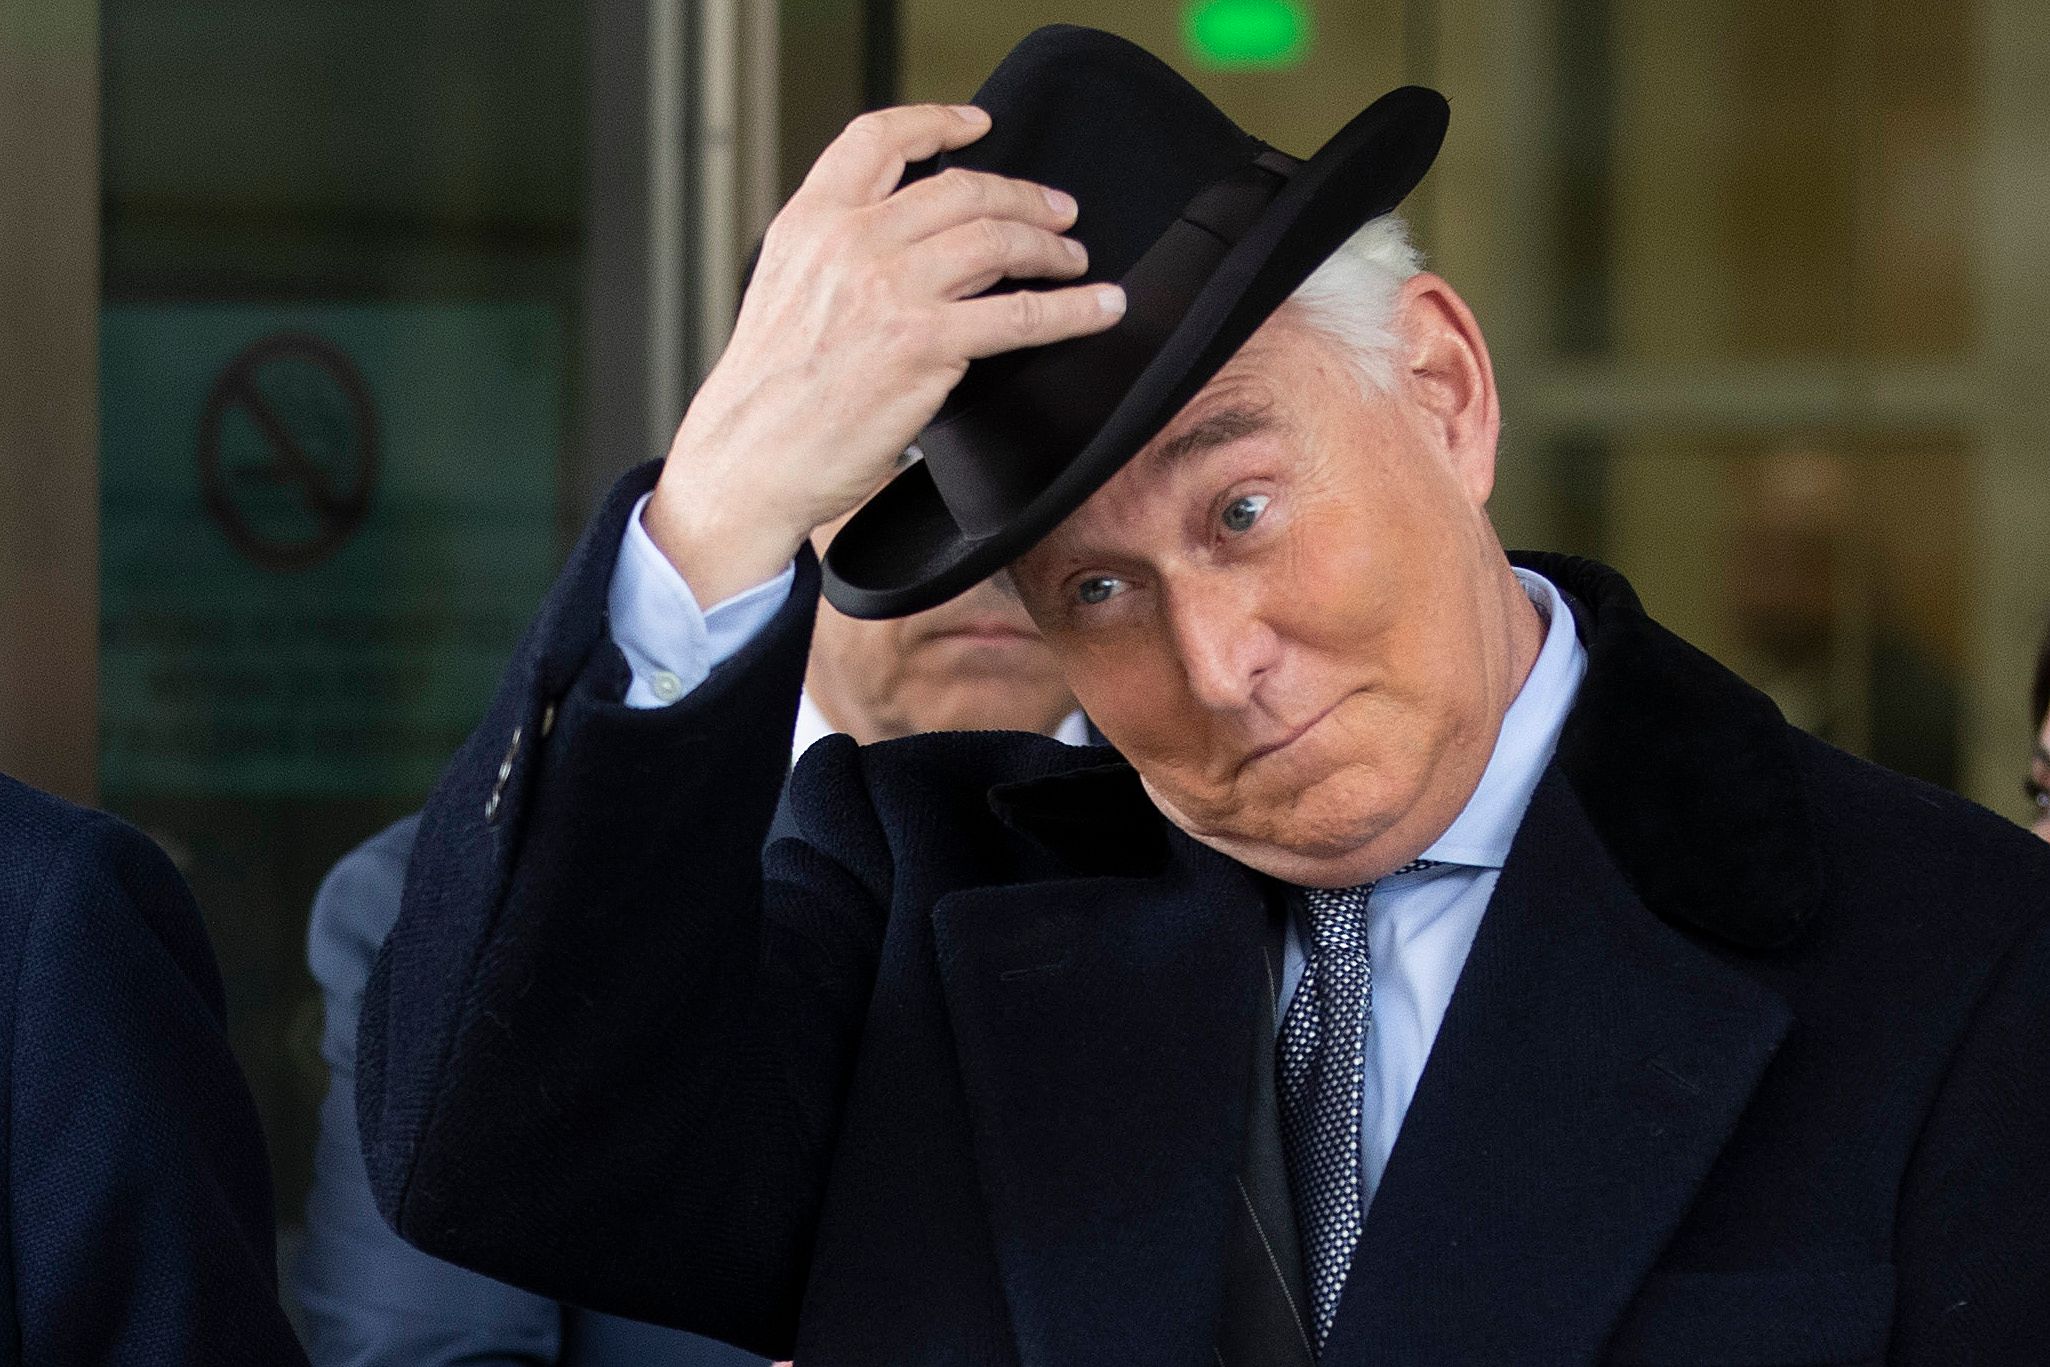 Roger Stone tips his hat.